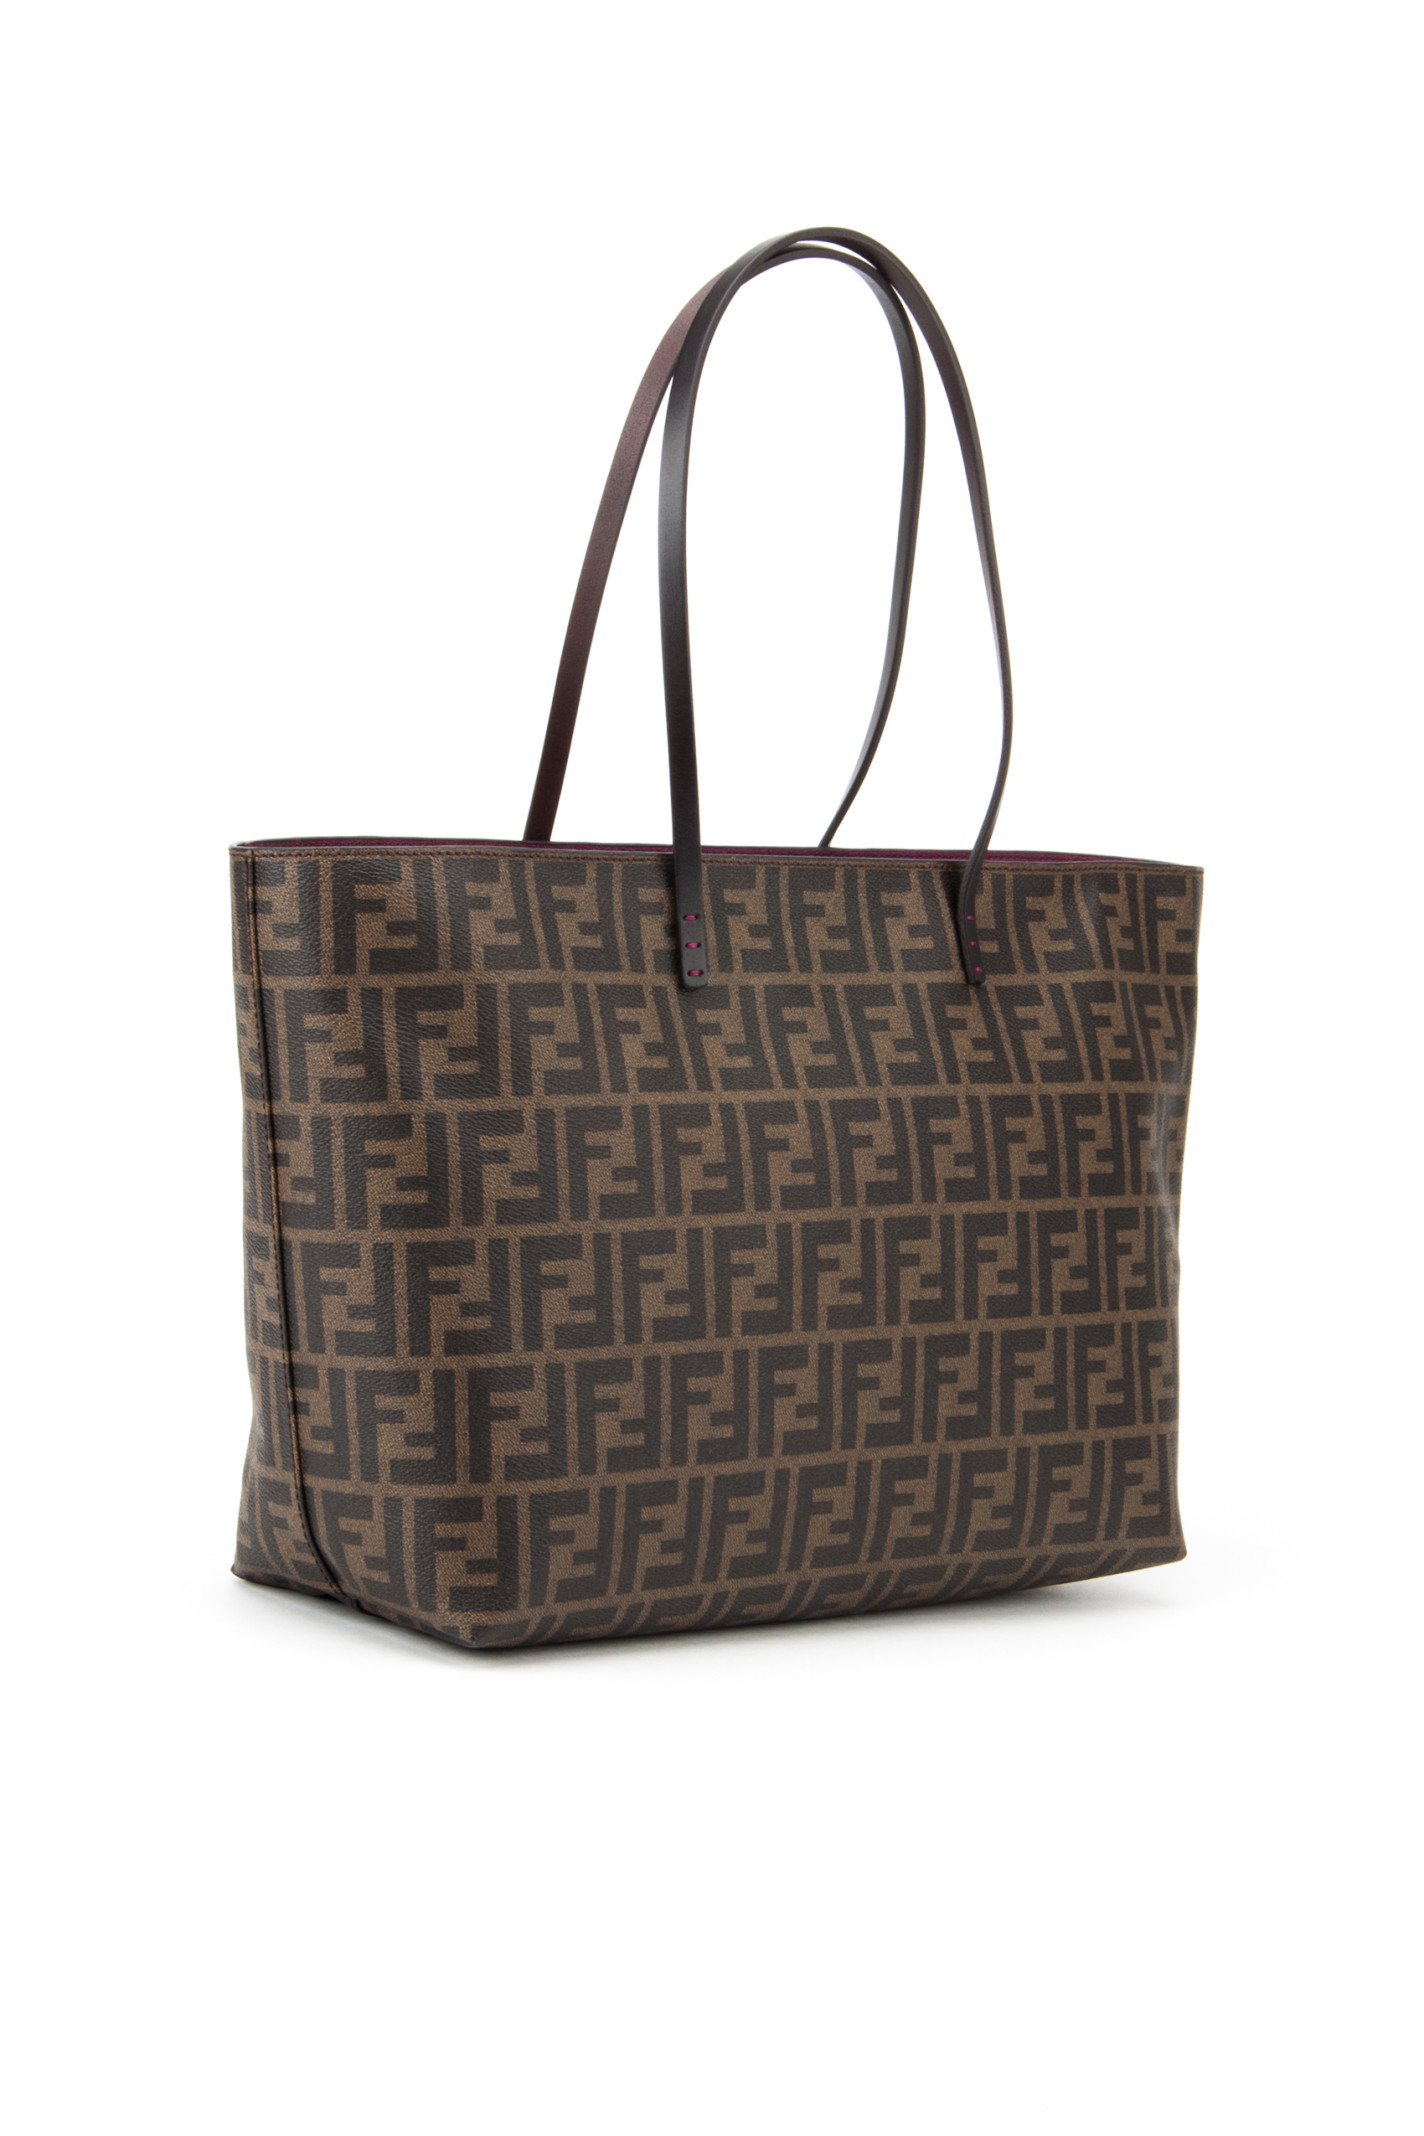 Fendi Zipped Roll Bag With Zucca Pattern in Brown (TABACCO+FUXIA+MORO ...